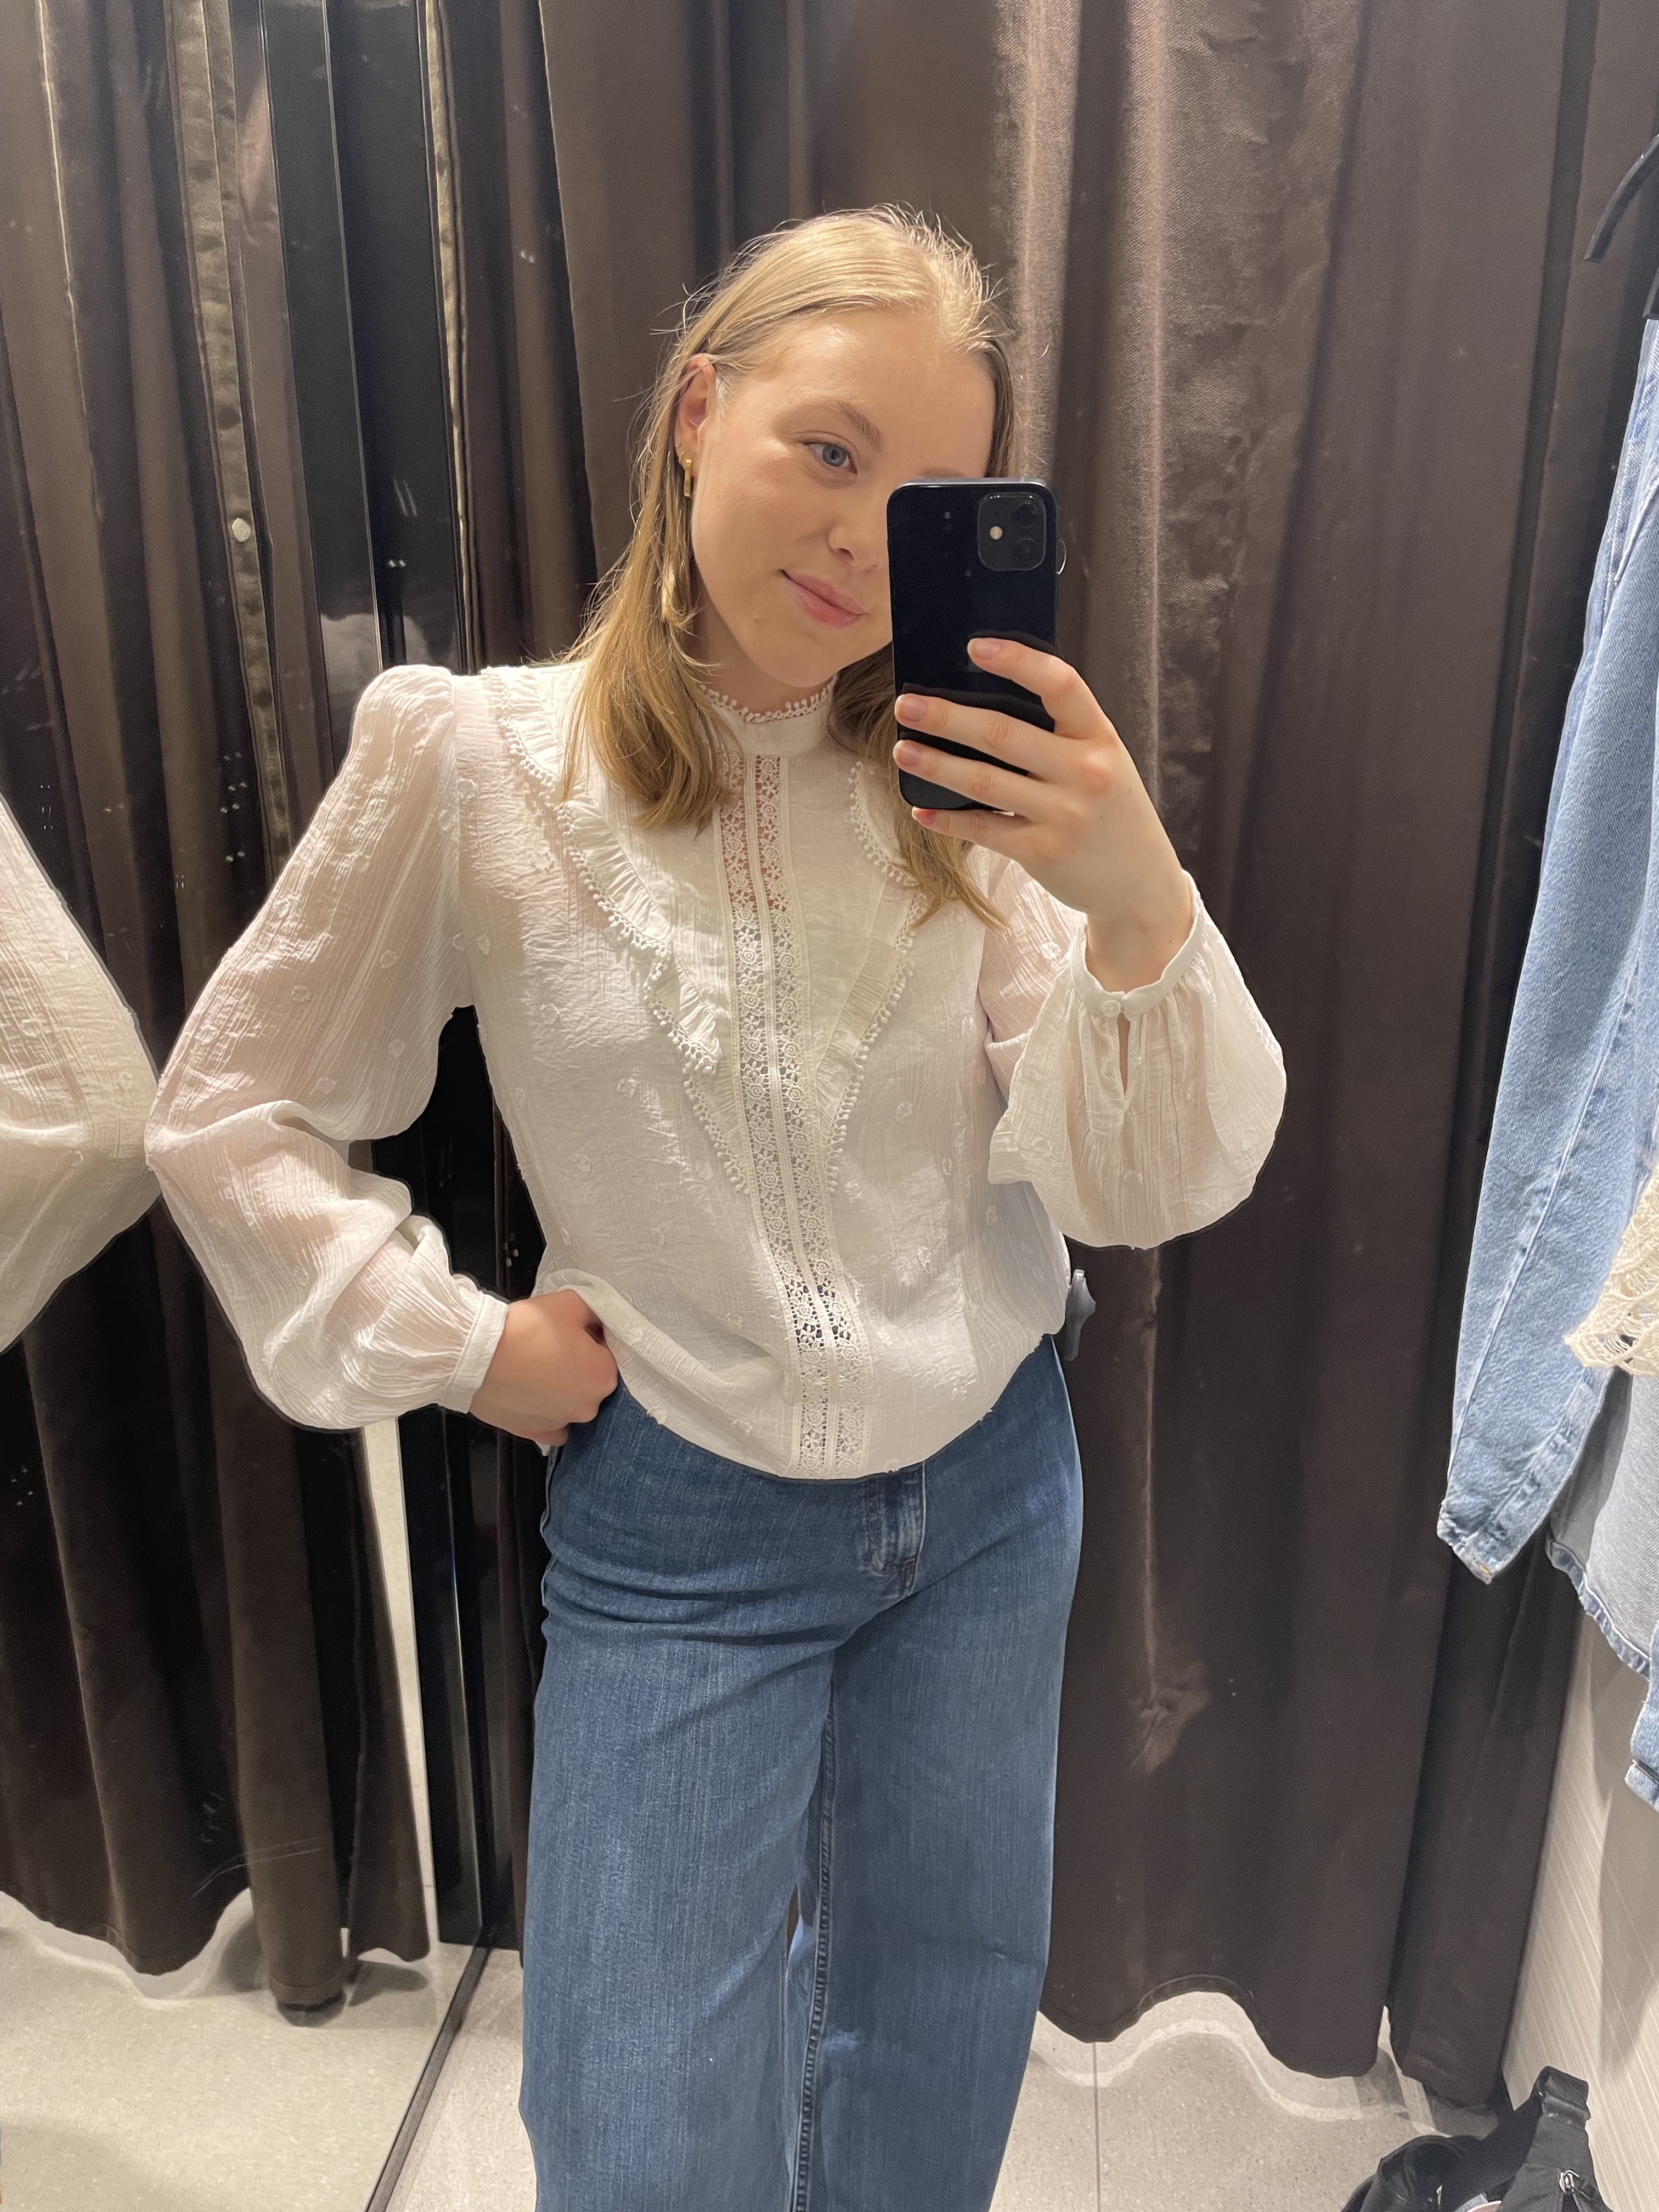 Woman in dressing room wears lace trim top and blue jeans